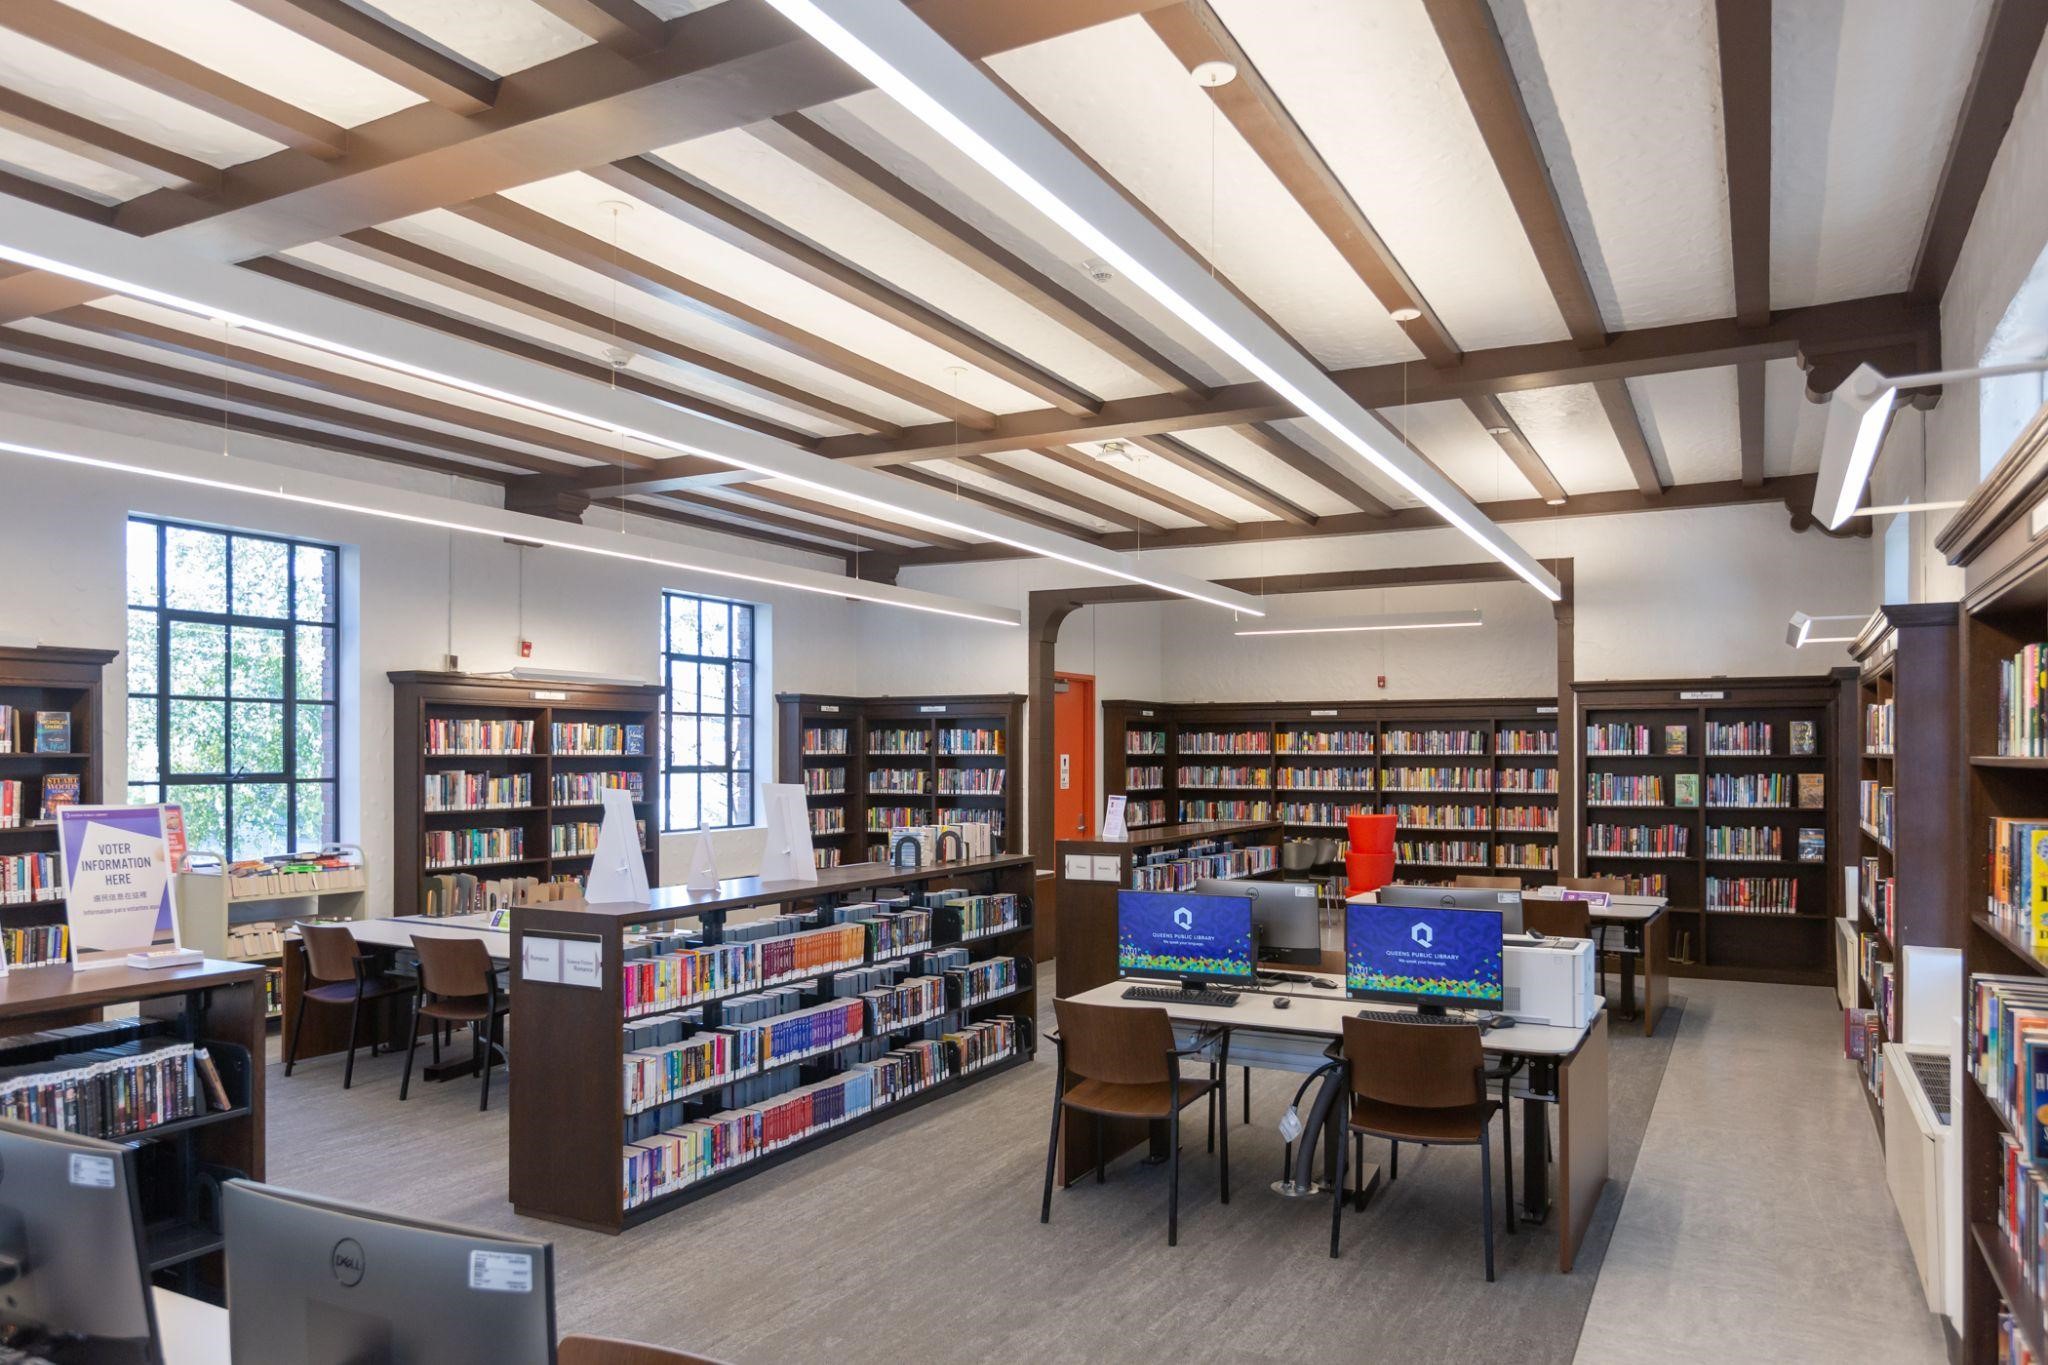 Inside the renovated Glendale Library